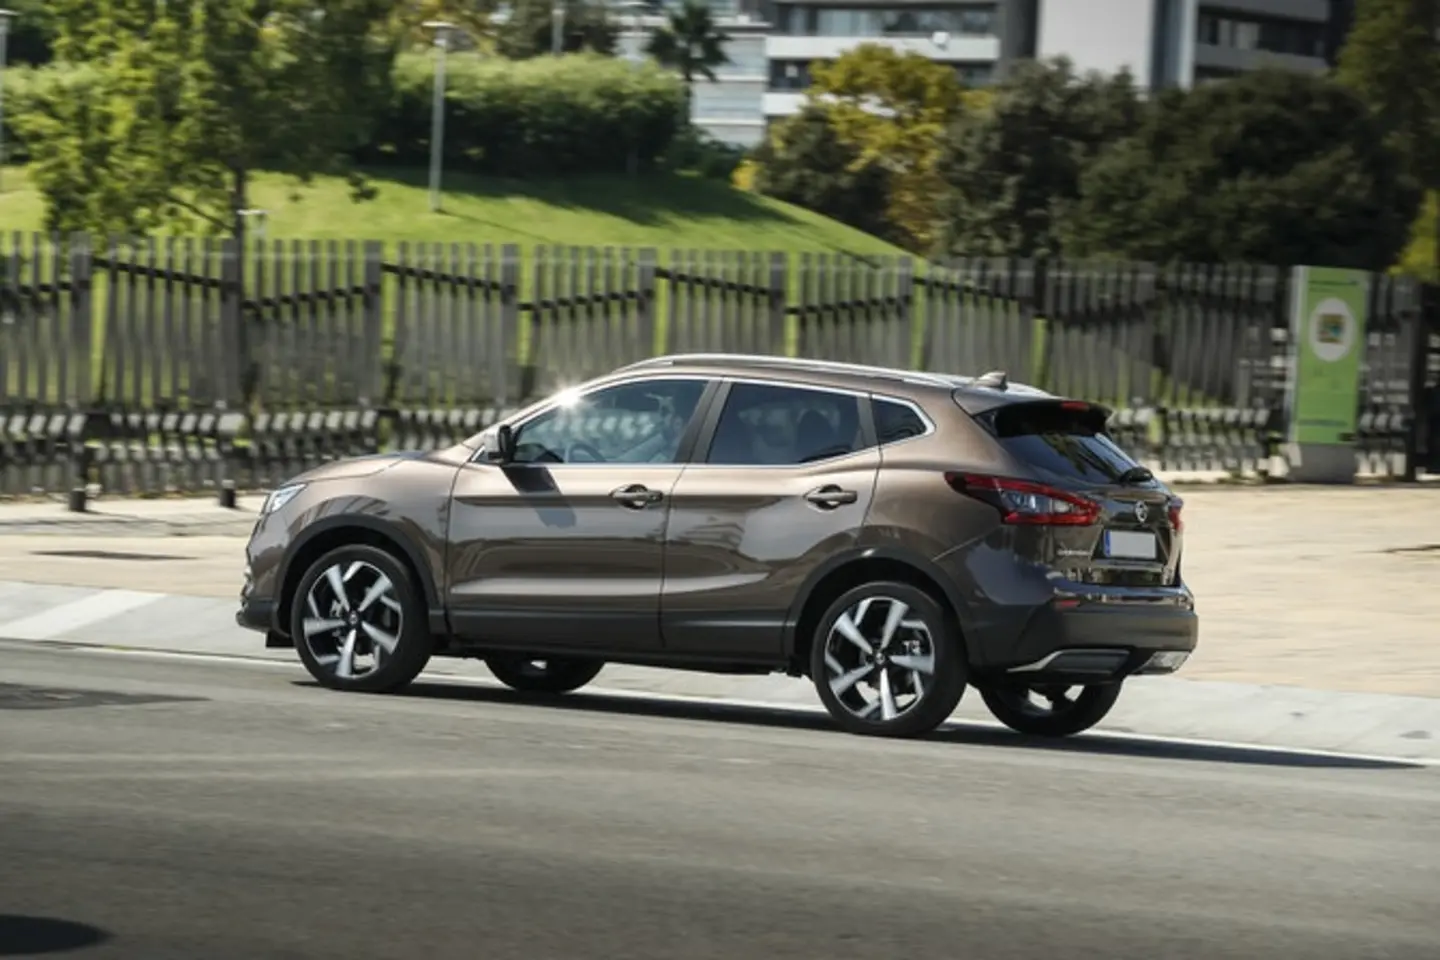 The side exterior of a brown Nissan Qashqai